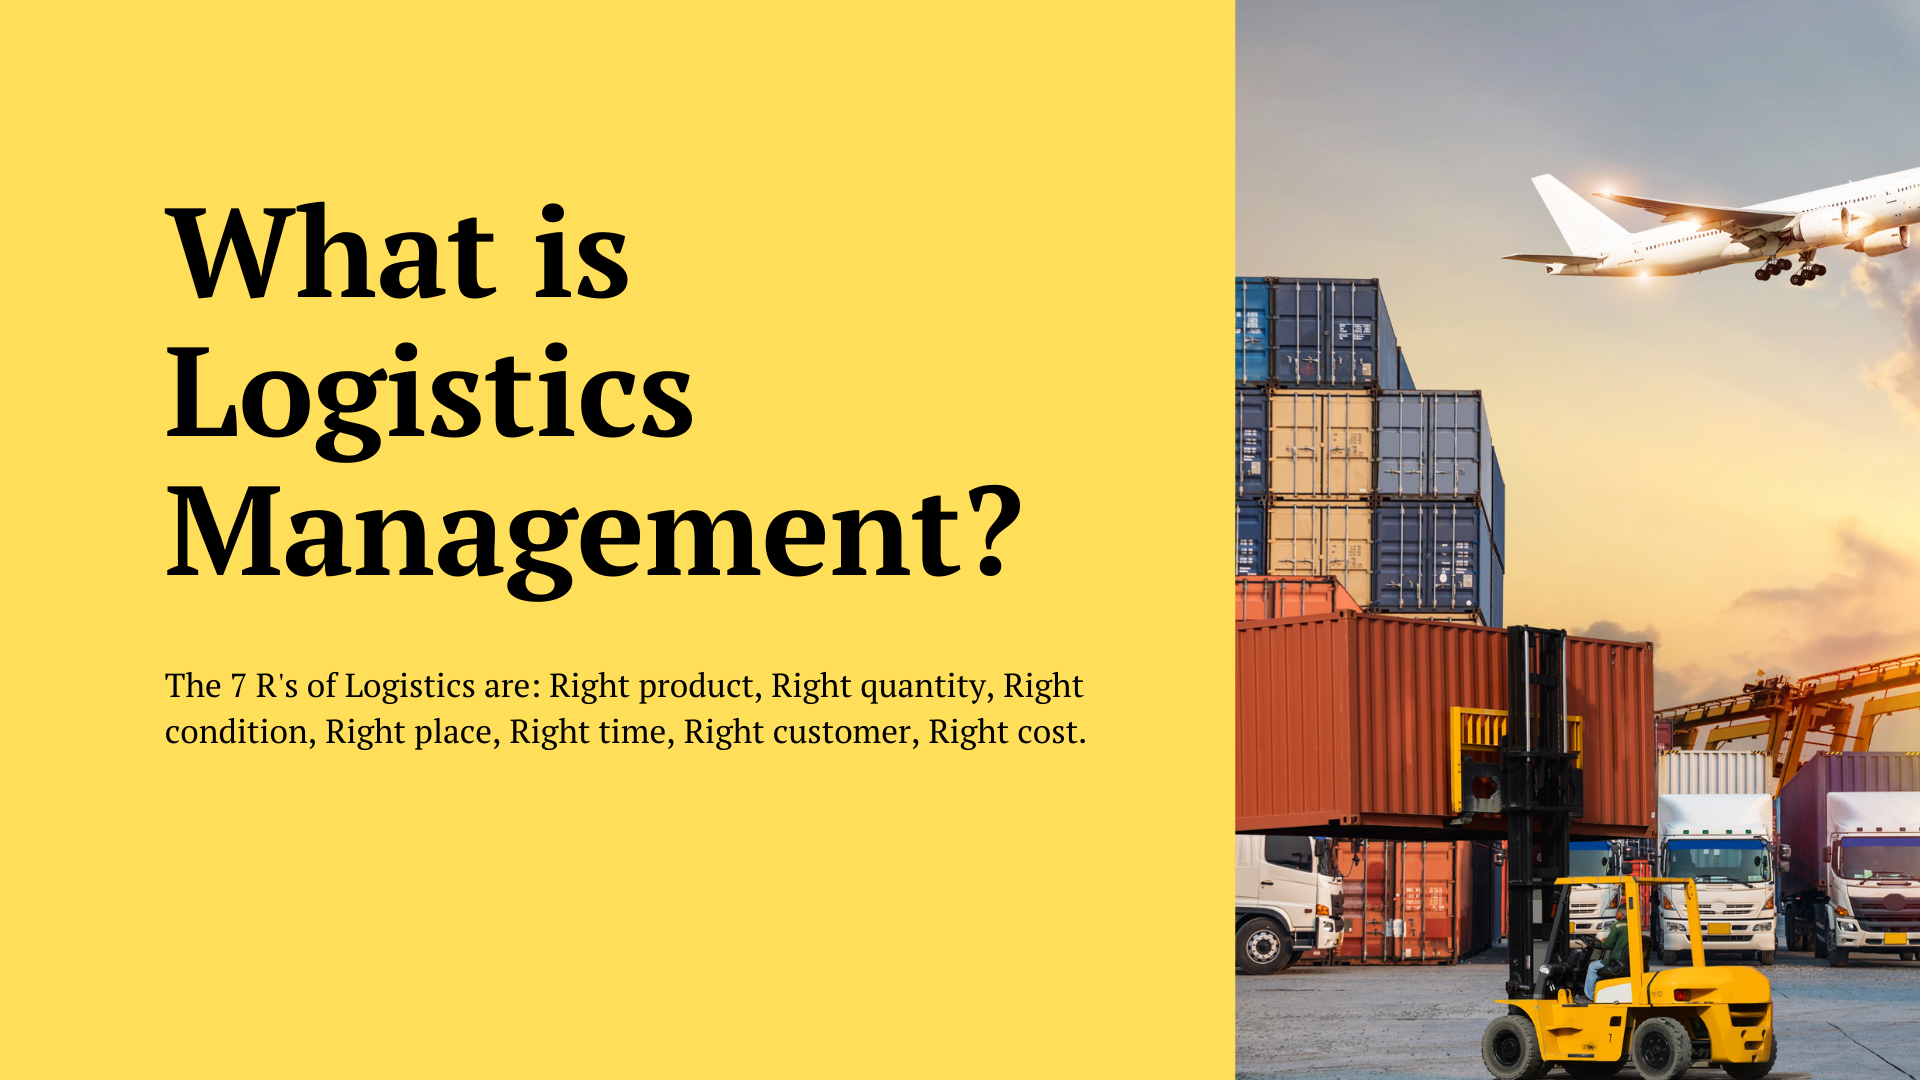 7 R’s of e-Logistics in Supply Chains for Success